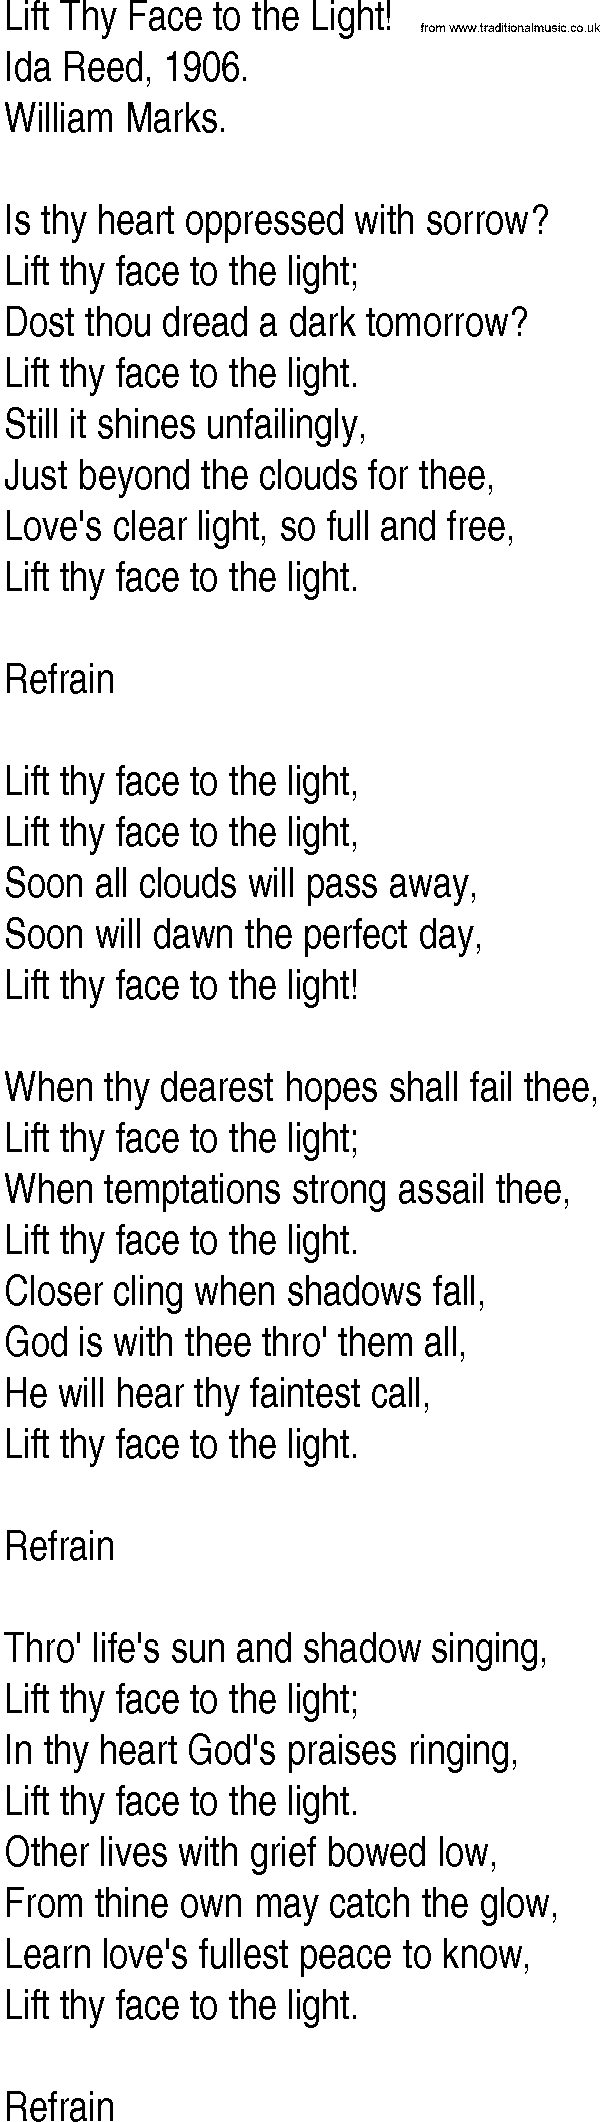 Hymn and Gospel Song: Lift Thy Face to the Light! by Ida Reed lyrics